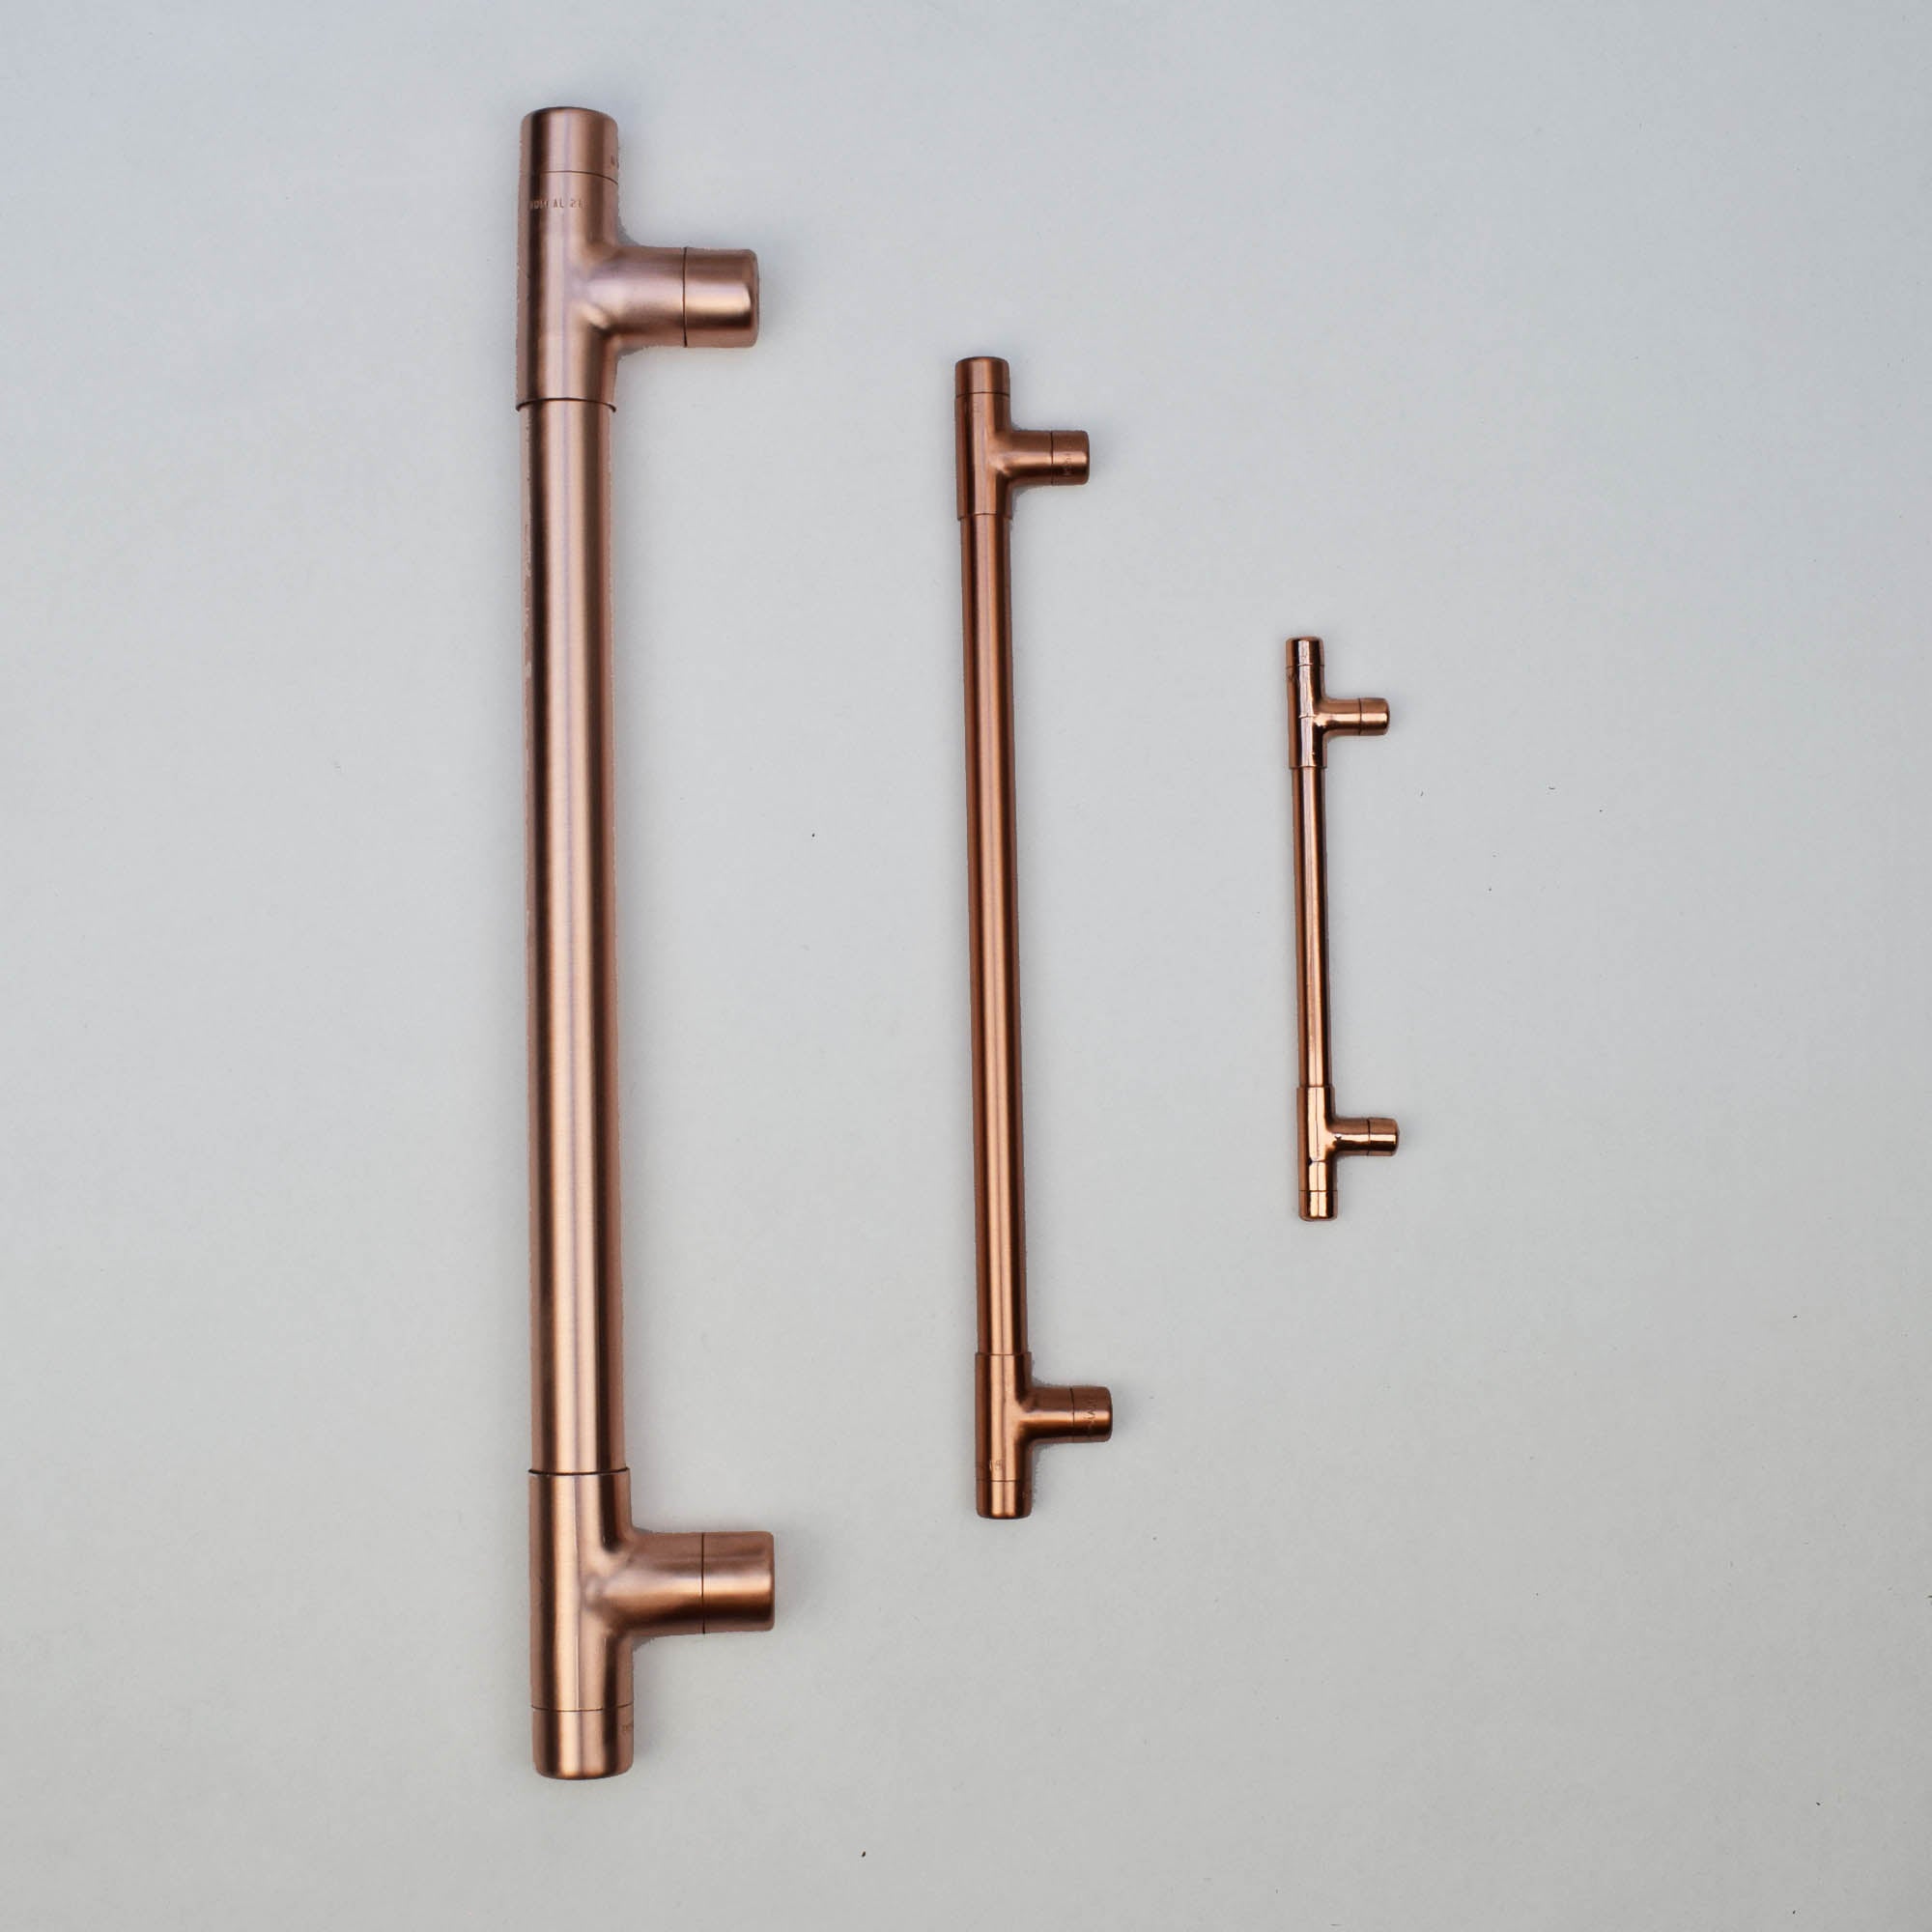 A comparison of our copper t pulls and front door large handle